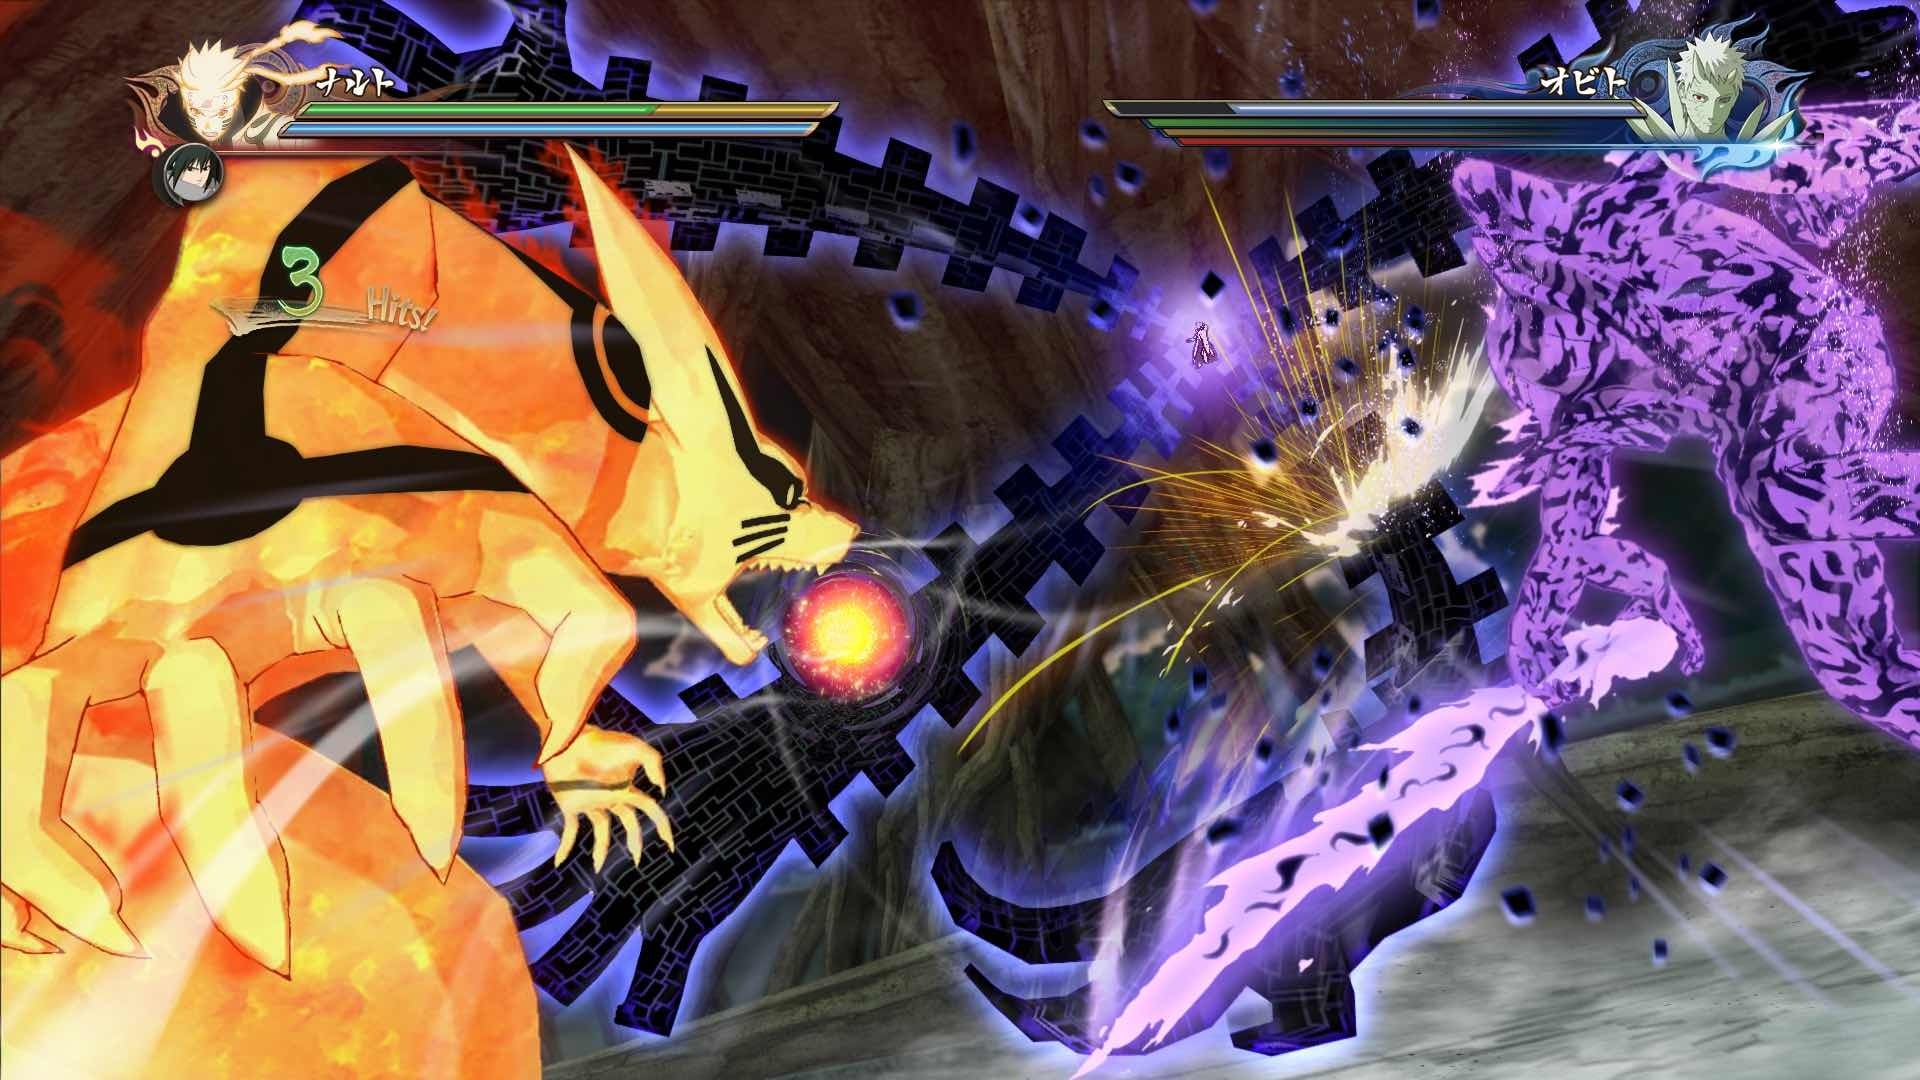 Naruto and Sasuke characters in intense battle from video game.In-game screenshot of Naruto and Sasuke fighting in a video game.